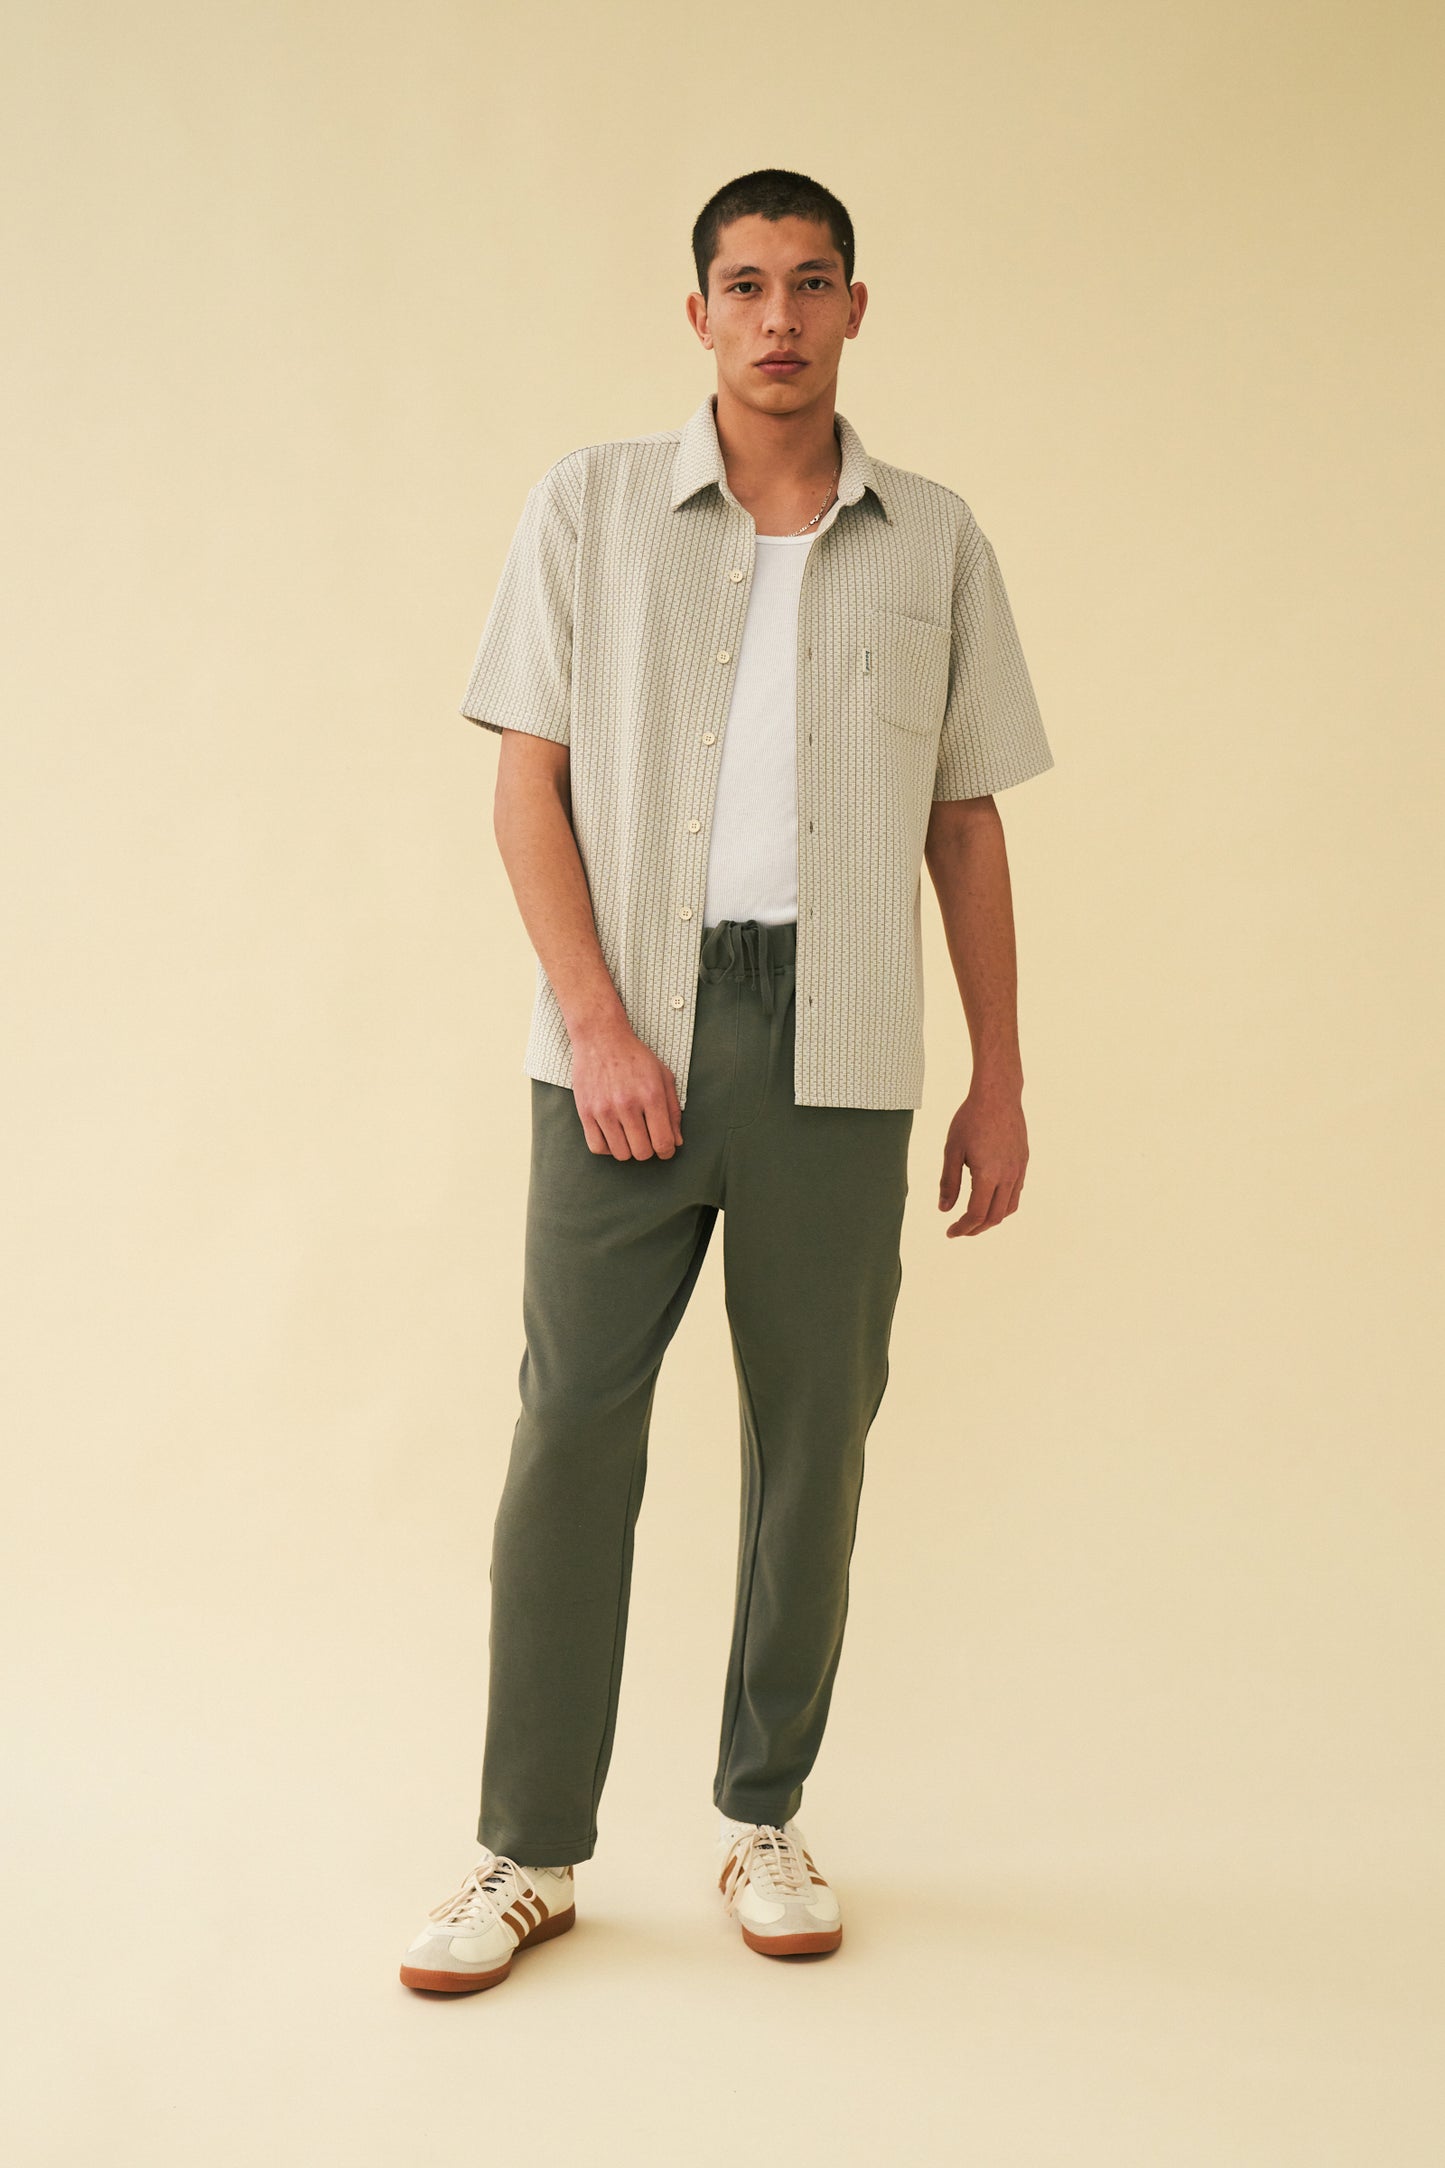 bound 'Olive' Textured Cotton Trousers